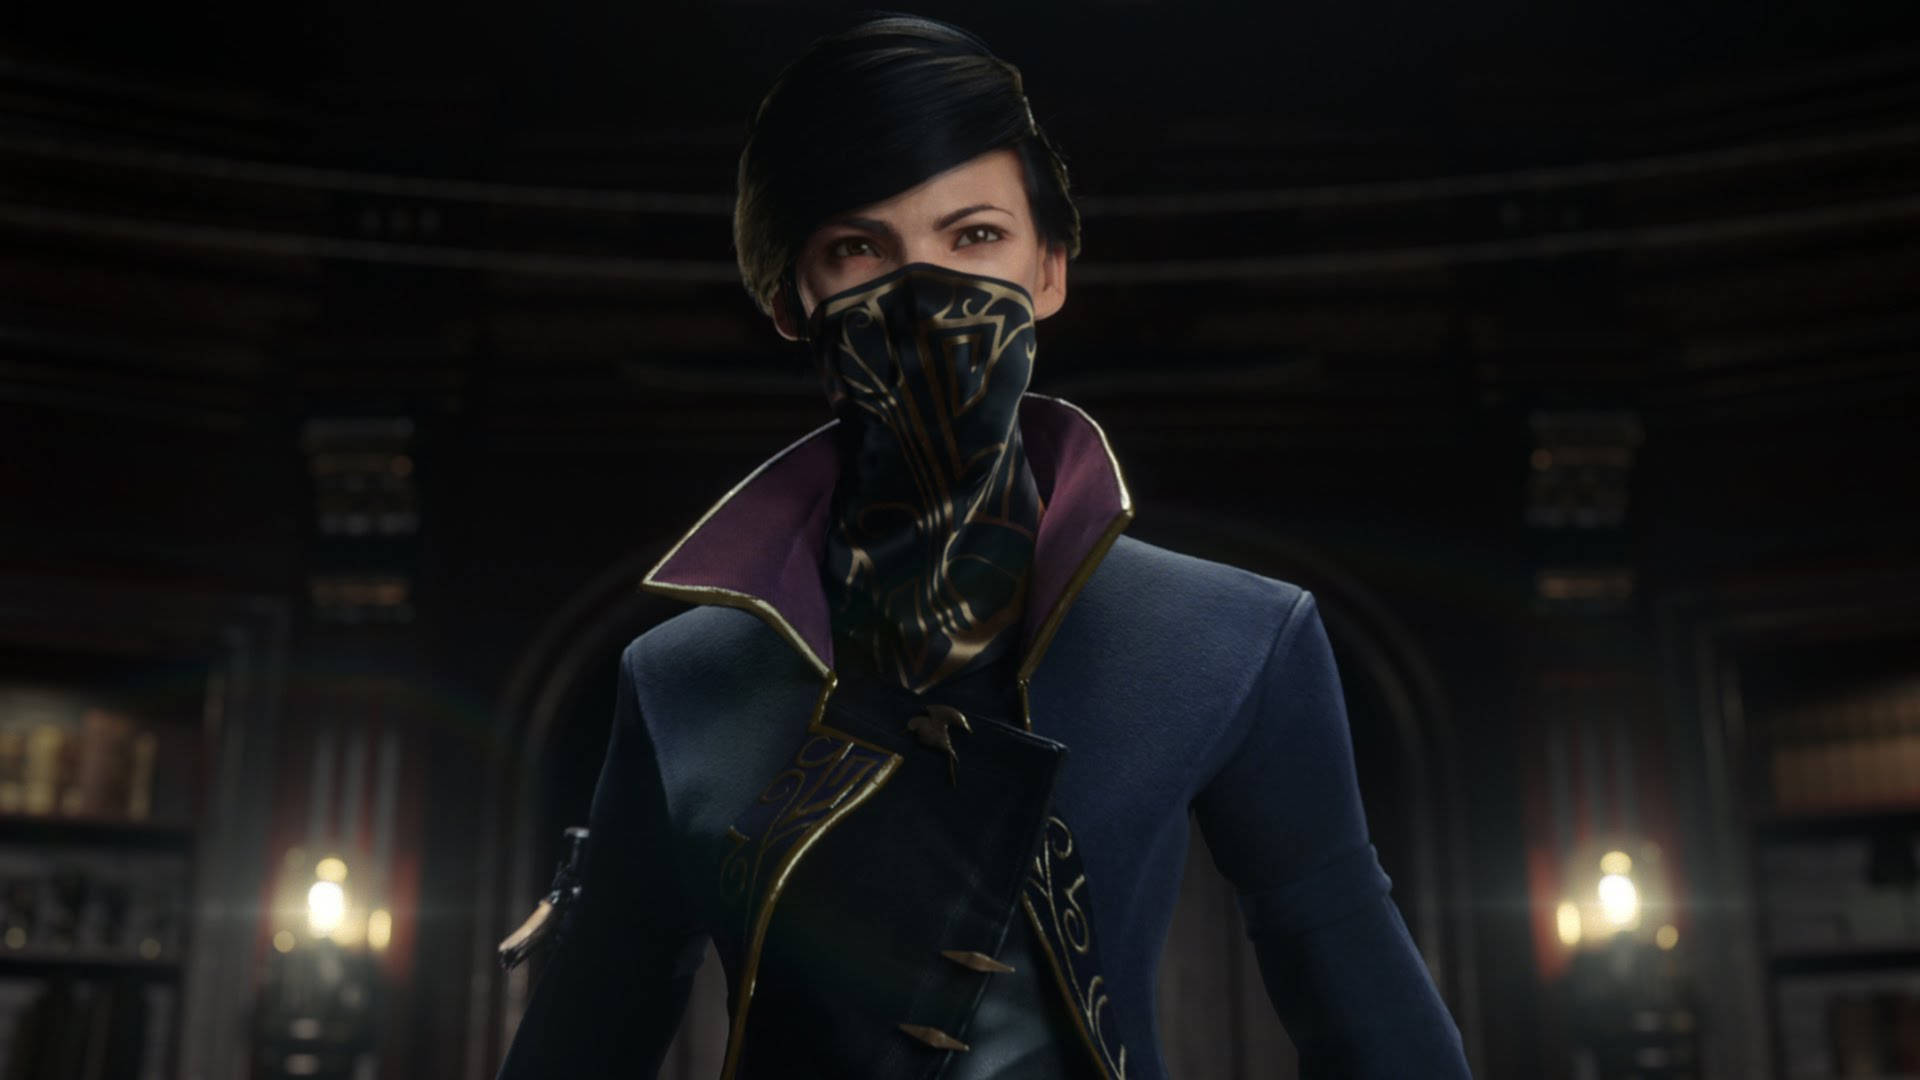 Dishonored 2 Emily Kaldwin In Building Wallpaper